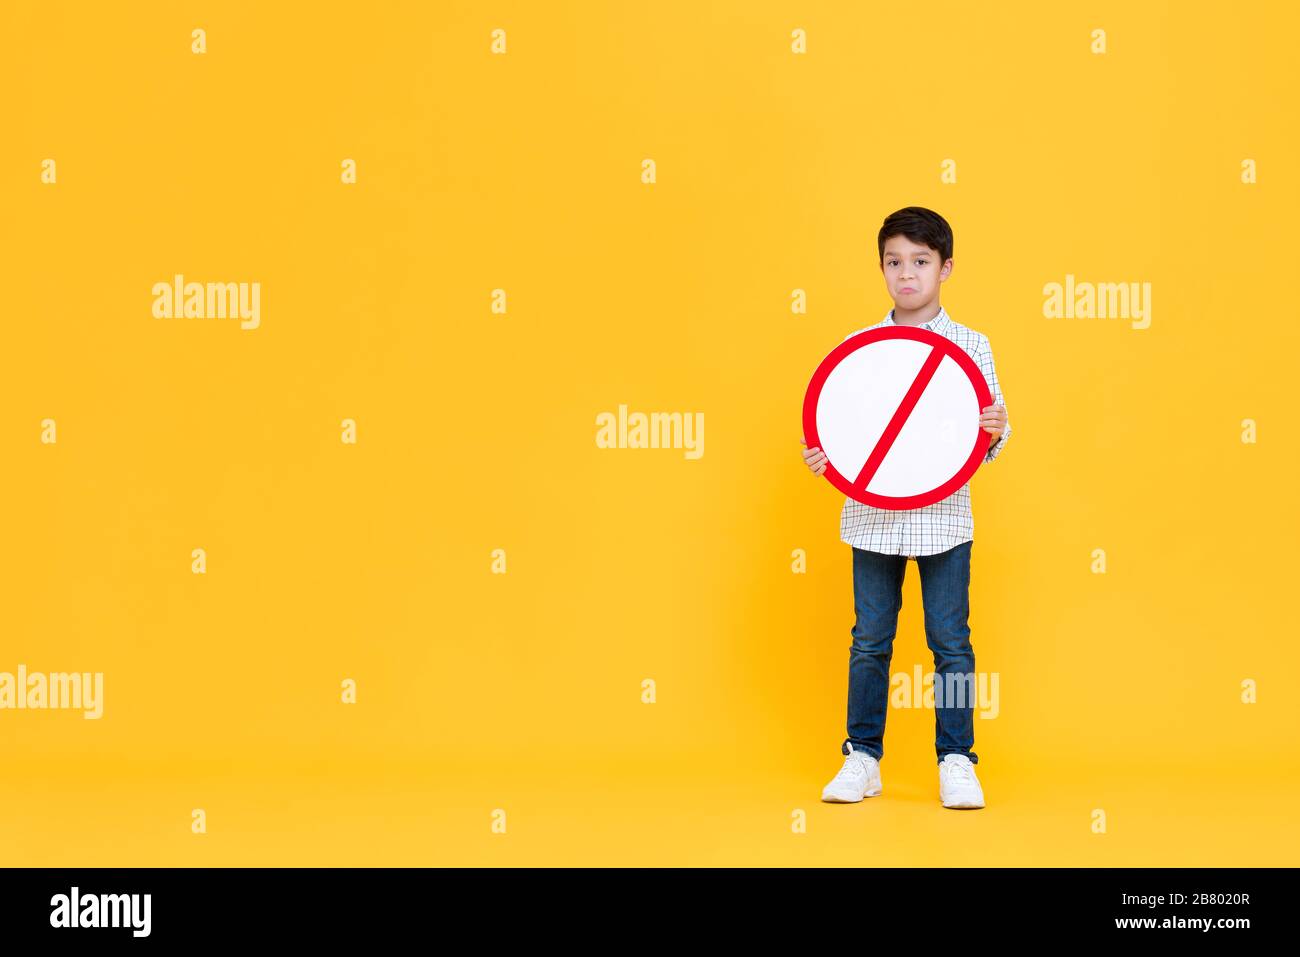 Portait of standing pouting young Asian boy holding red ban signage in yellow isolated studio background with copy space Stock Photo